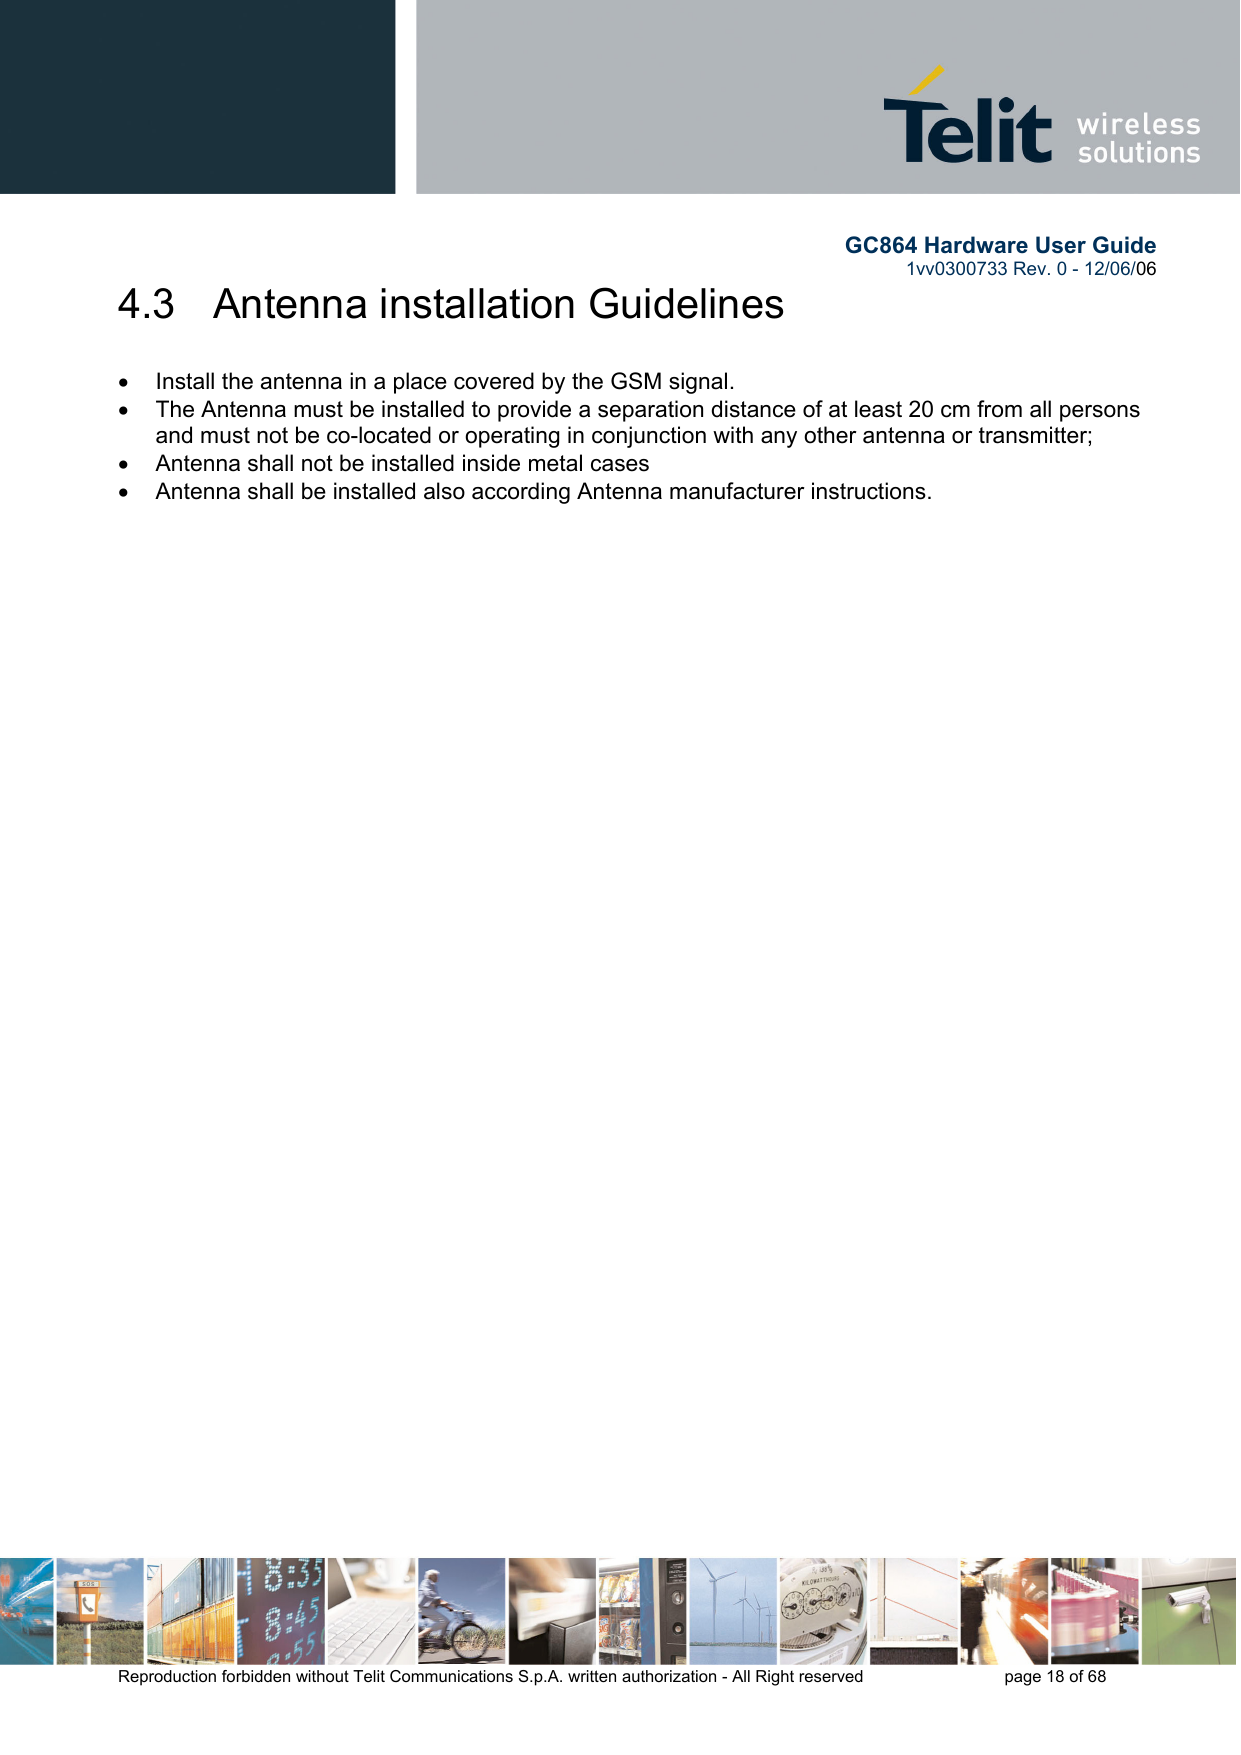        GC864 Hardware User Guide  1vv0300733 Rev. 0 - 12/06/06  Reproduction forbidden without Telit Communications S.p.A. written authorization - All Right reserved    page 18 of 68  4.3   Antenna installation Guidelines  •  Install the antenna in a place covered by the GSM signal. •  The Antenna must be installed to provide a separation distance of at least 20 cm from all persons and must not be co-located or operating in conjunction with any other antenna or transmitter; •  Antenna shall not be installed inside metal cases  •  Antenna shall be installed also according Antenna manufacturer instructions. 